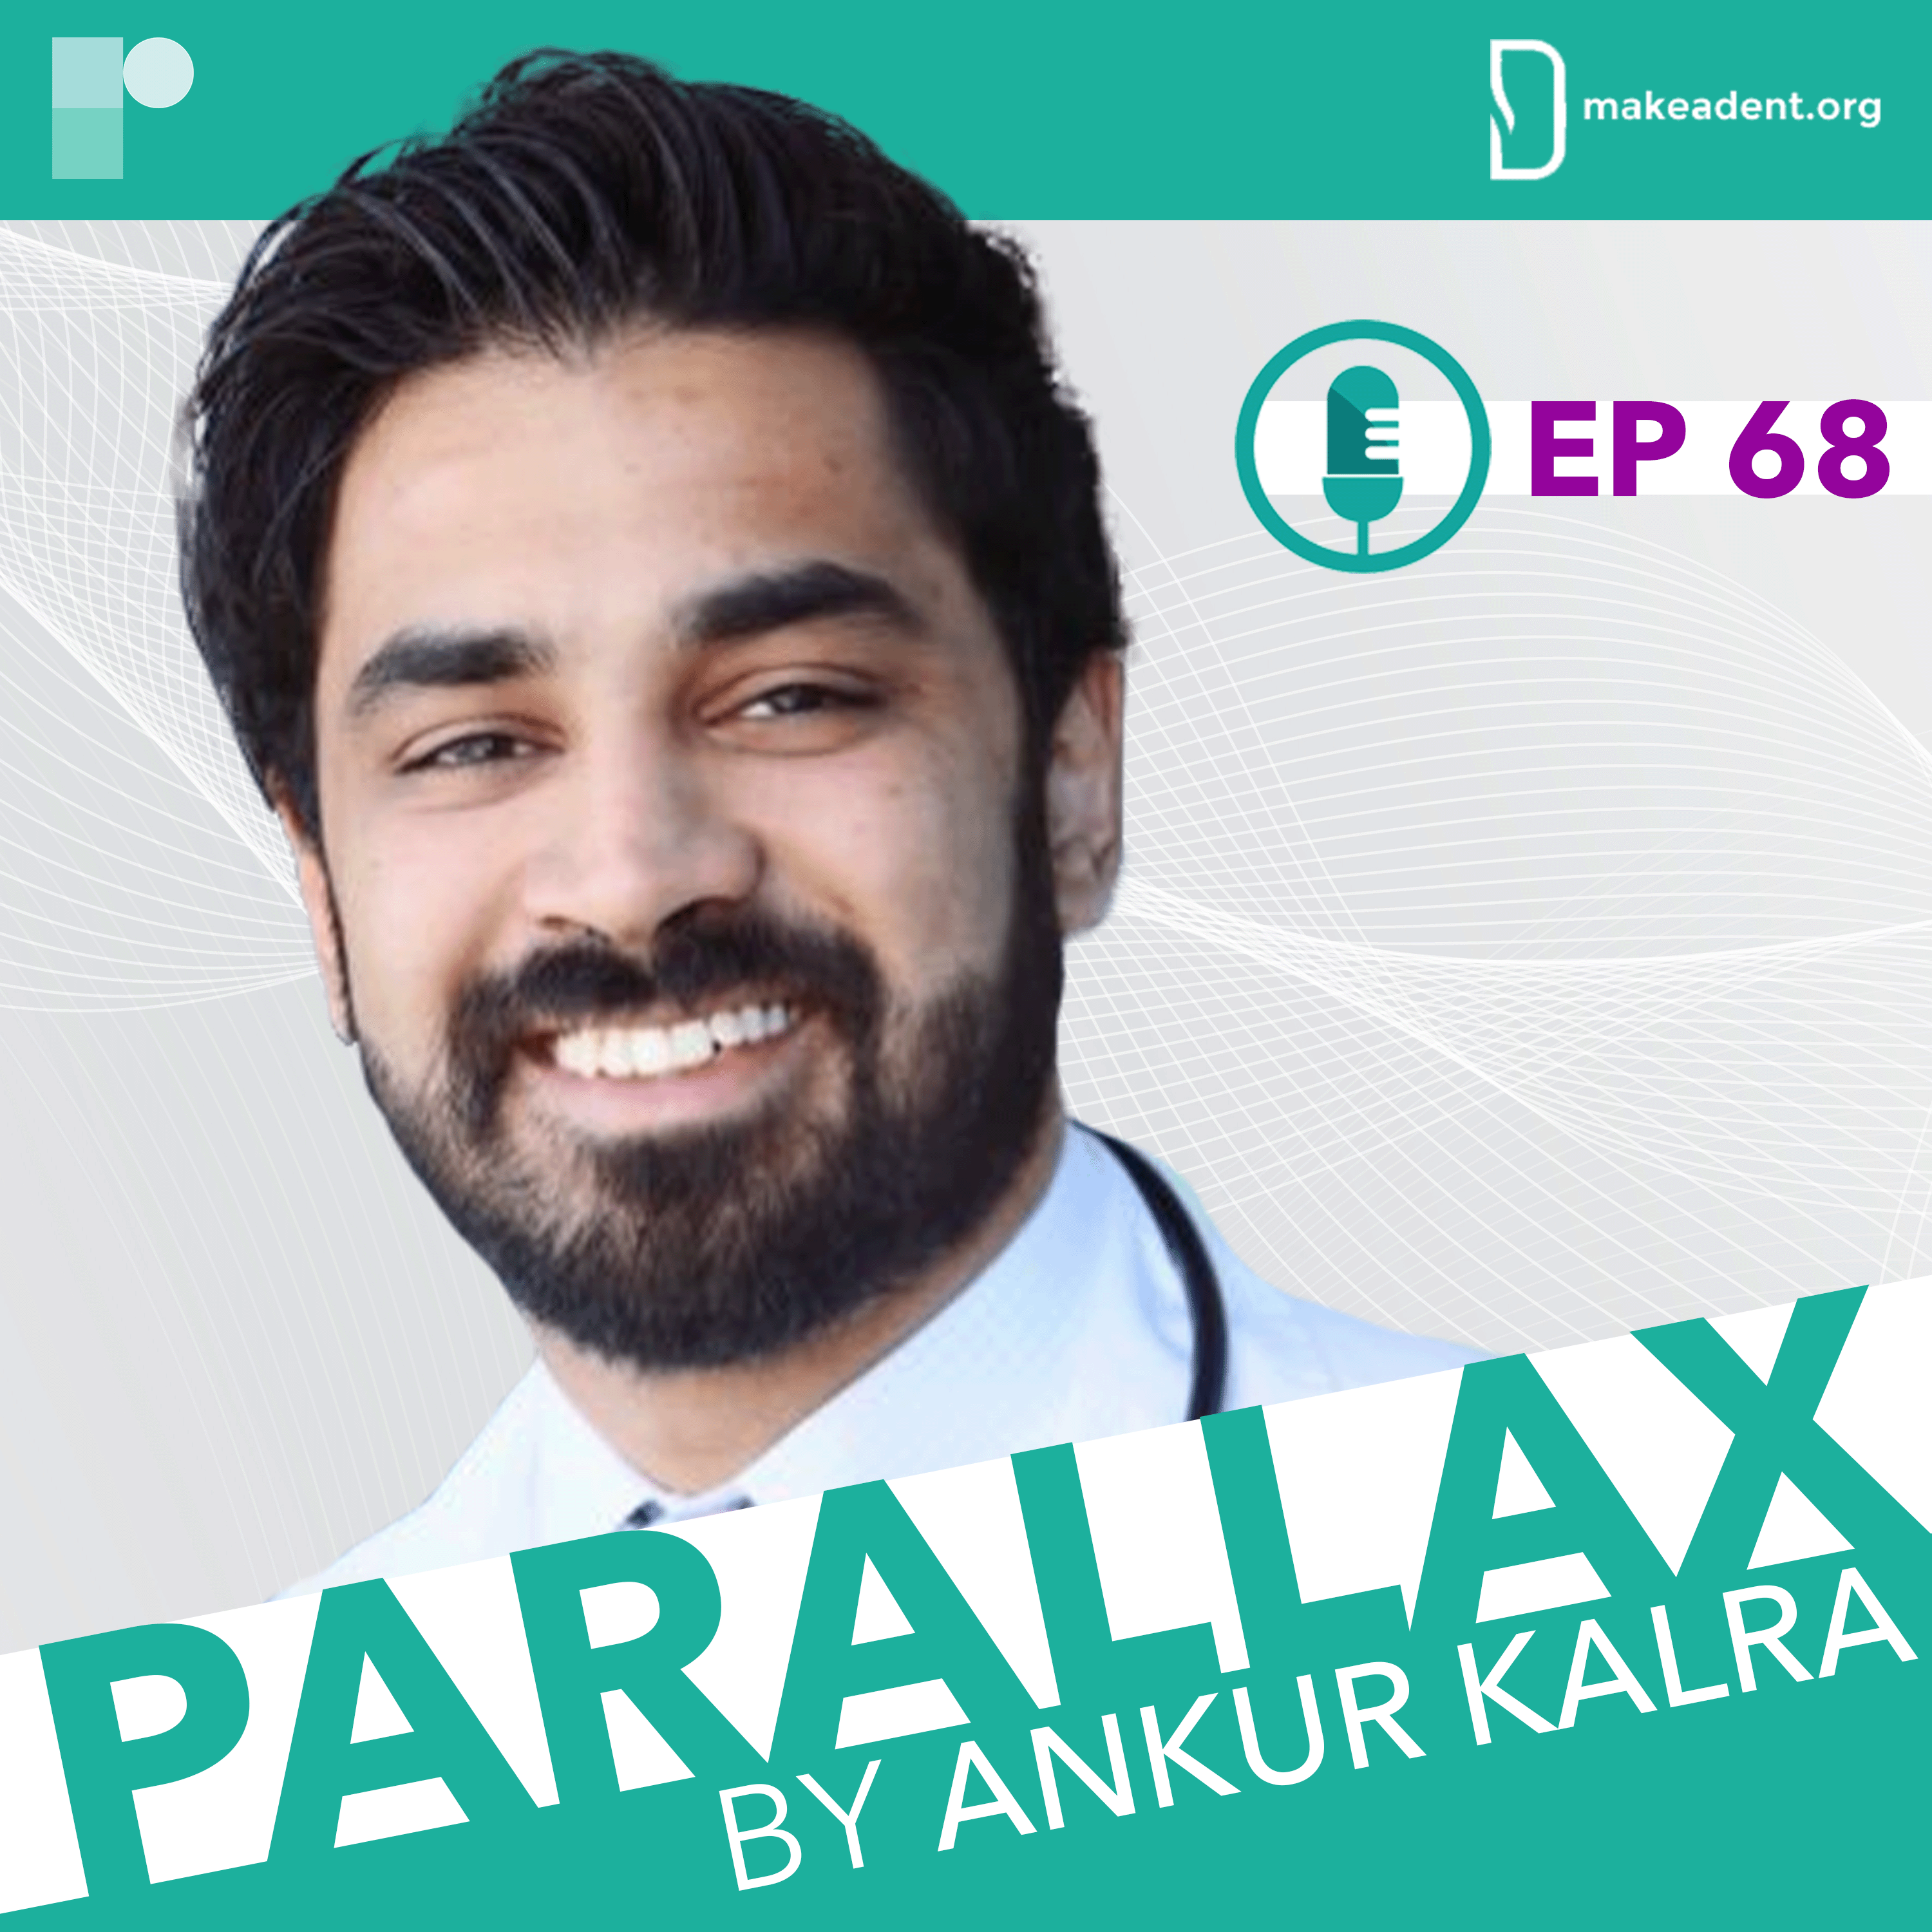 EP 68: Public Health, Fighting Misinformation and TikTok with Dr Muhammad Siyab